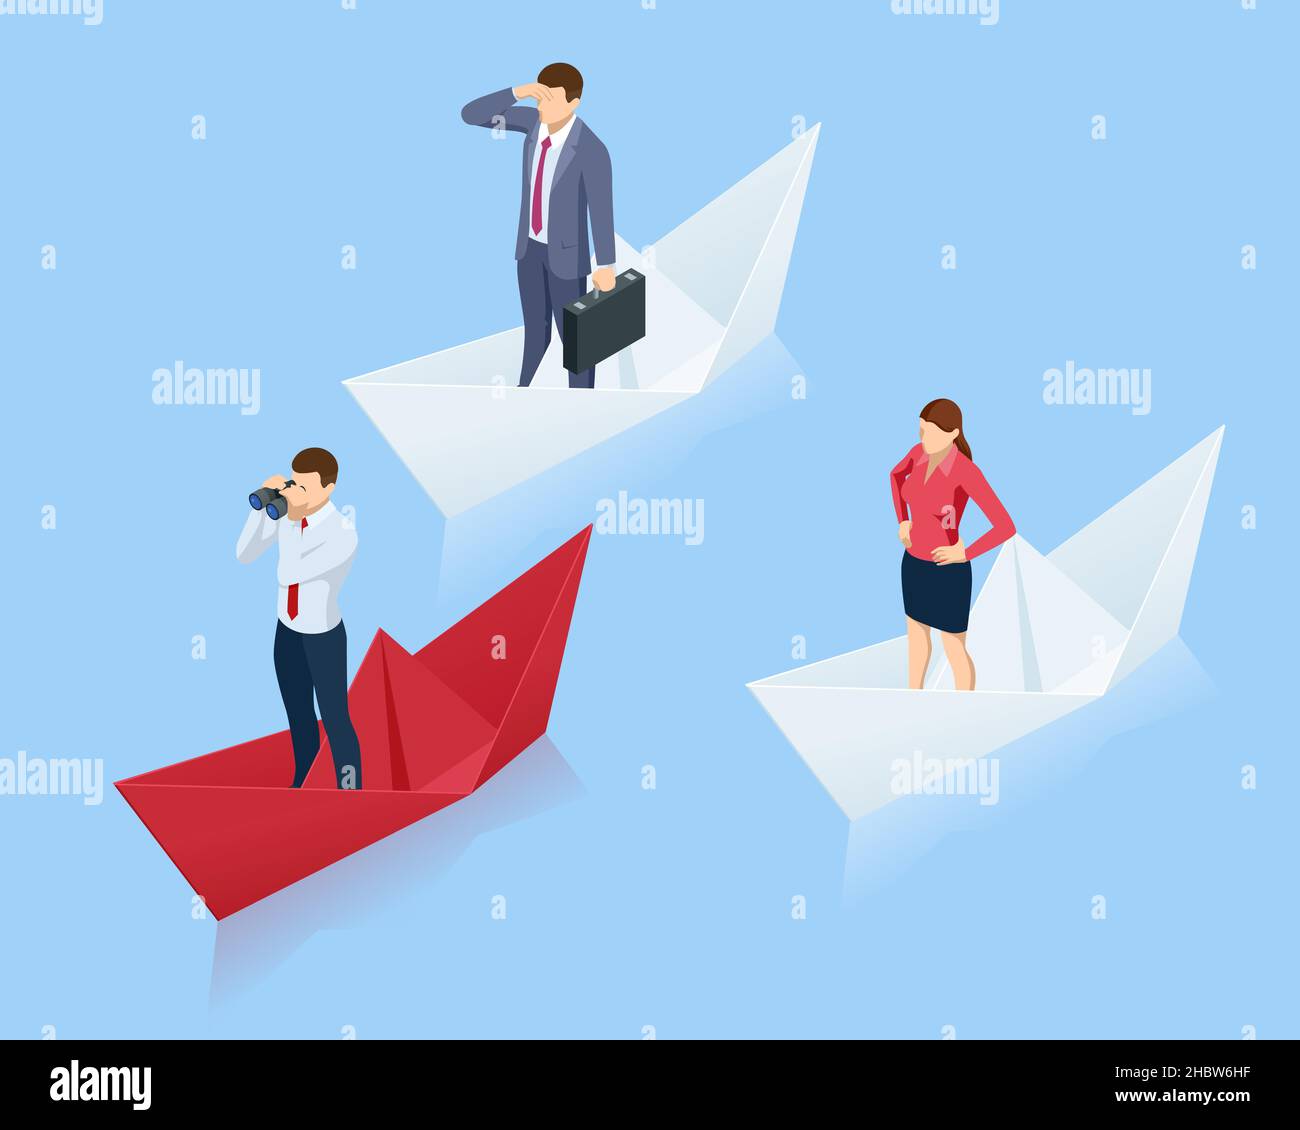 Leadership concept. Red leader paper ship leading among others on blue background. Stock Vector